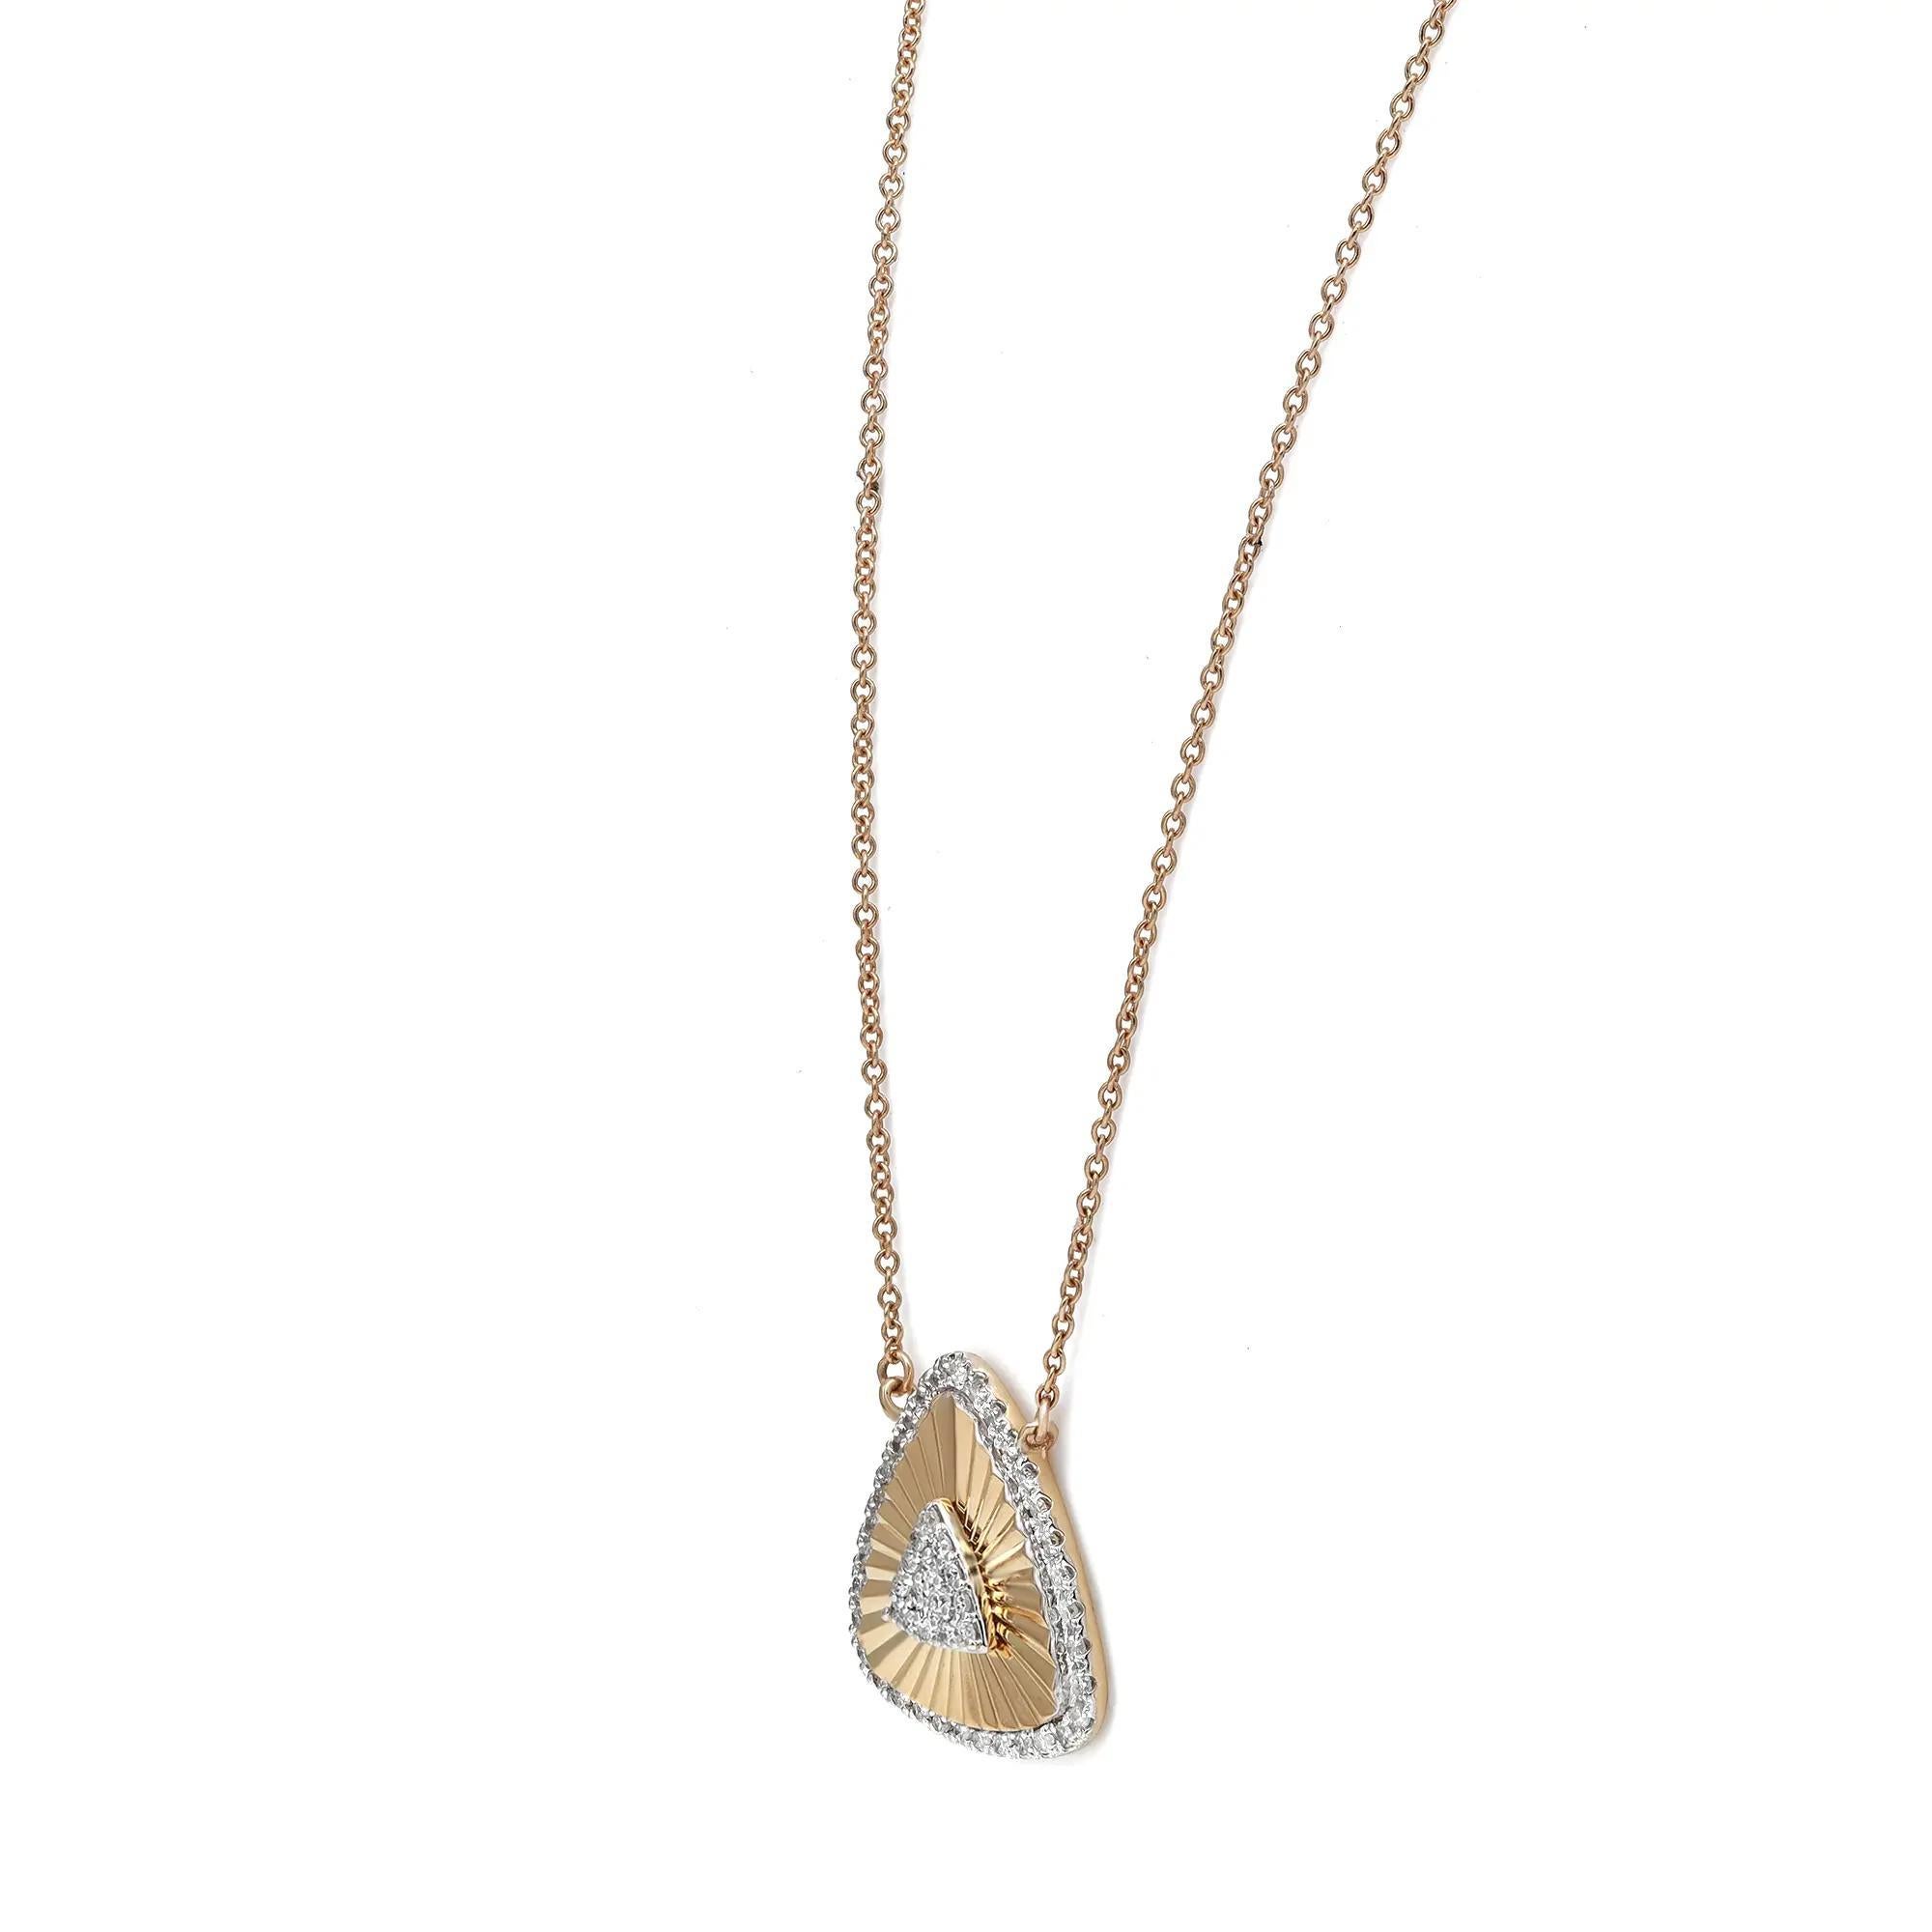 Elevate any outfit with this beautiful triangular diamond pendant necklace. Crafted in 14K yellow gold. This pendant features engraved pave set round cut diamonds studded in a triangular pendant with cuban link adjustable chain. Secured with a